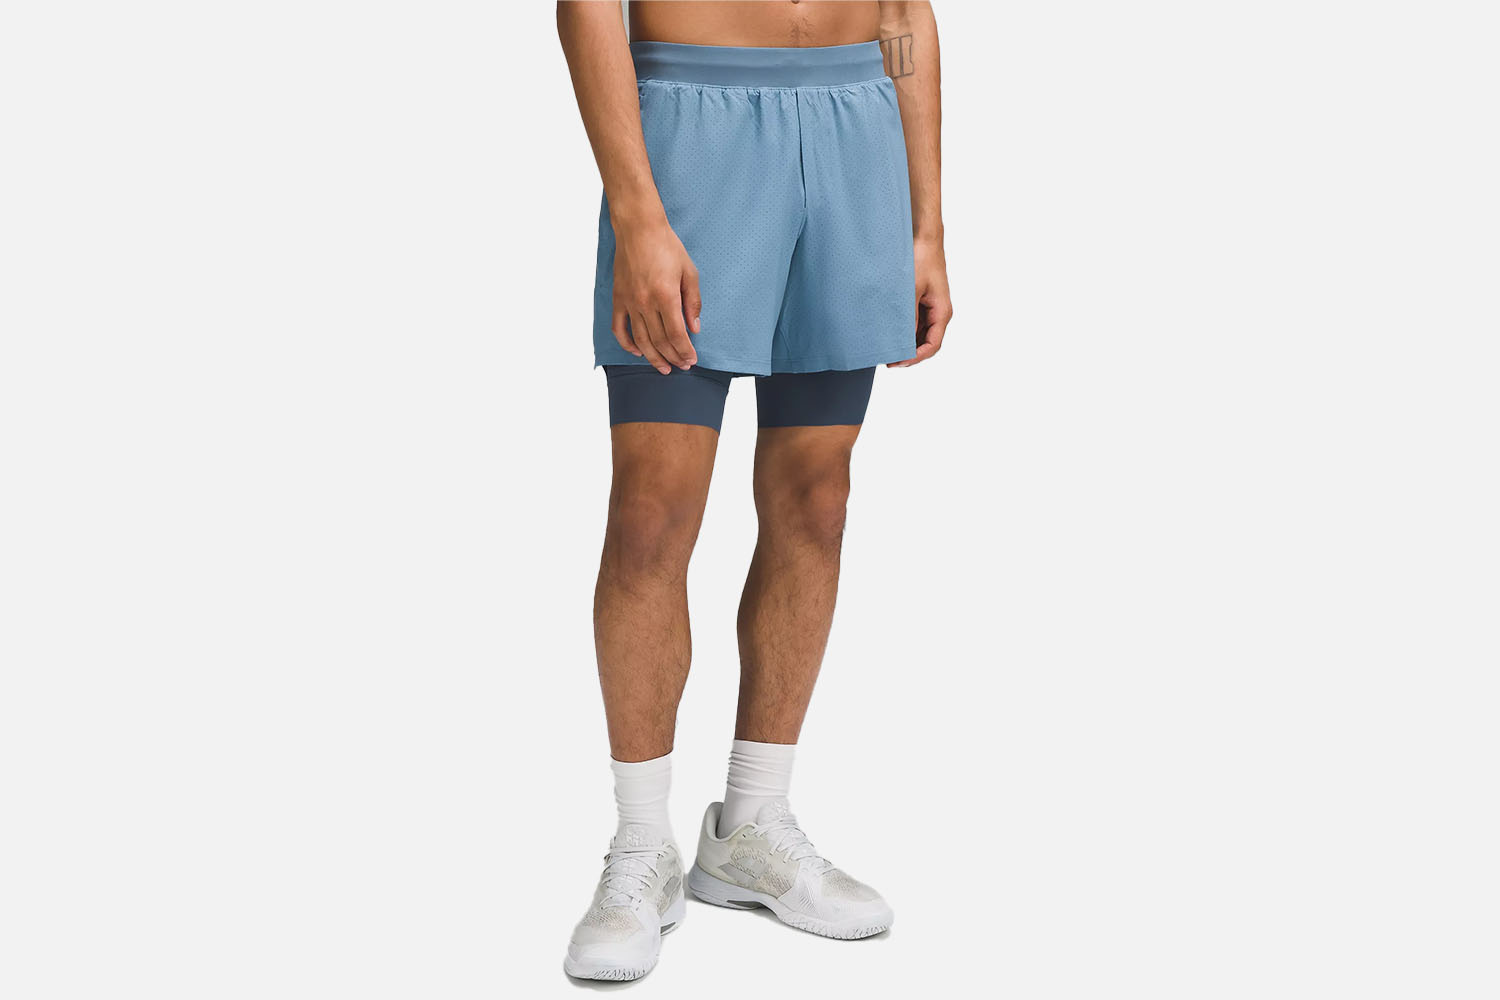 The 2-in-1 Shorts: lululemon Vented Tennis Short 6″